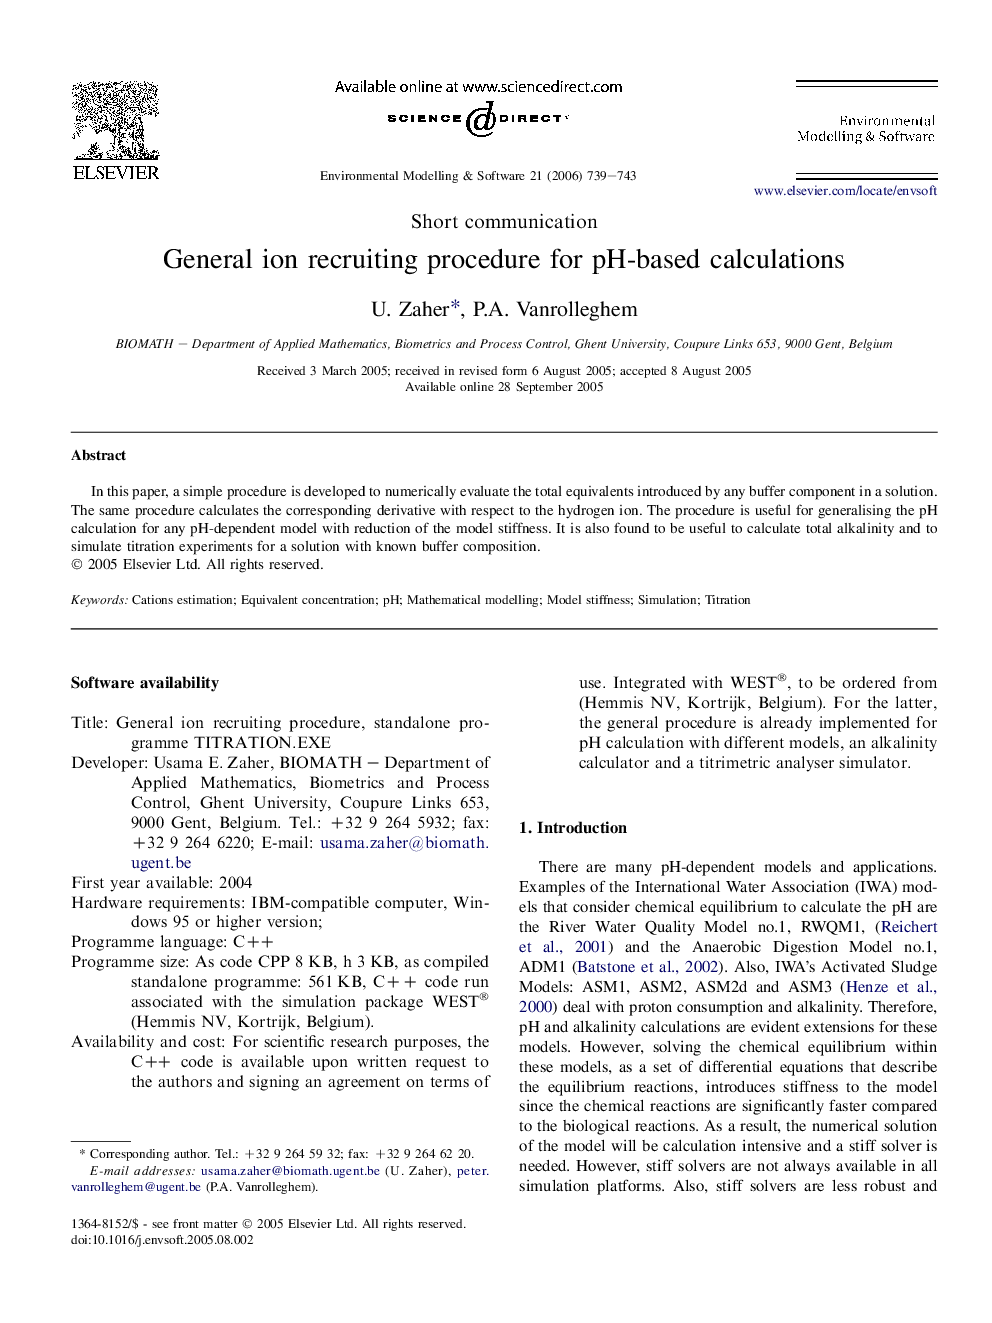 General ion recruiting procedure for pH-based calculations